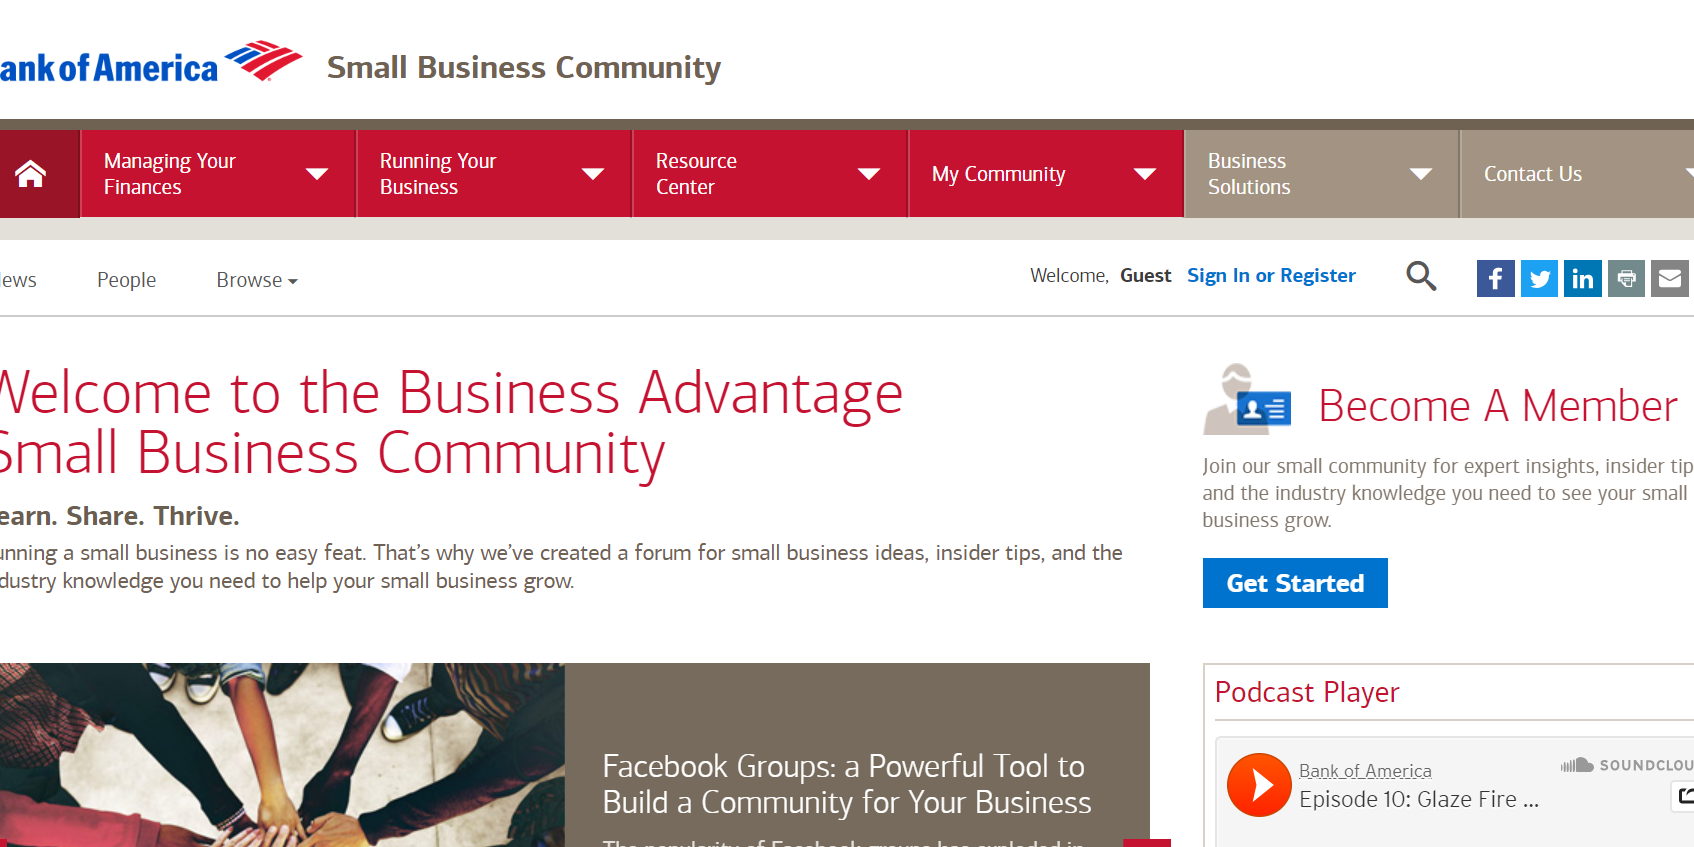 Bank of America Small Business Community